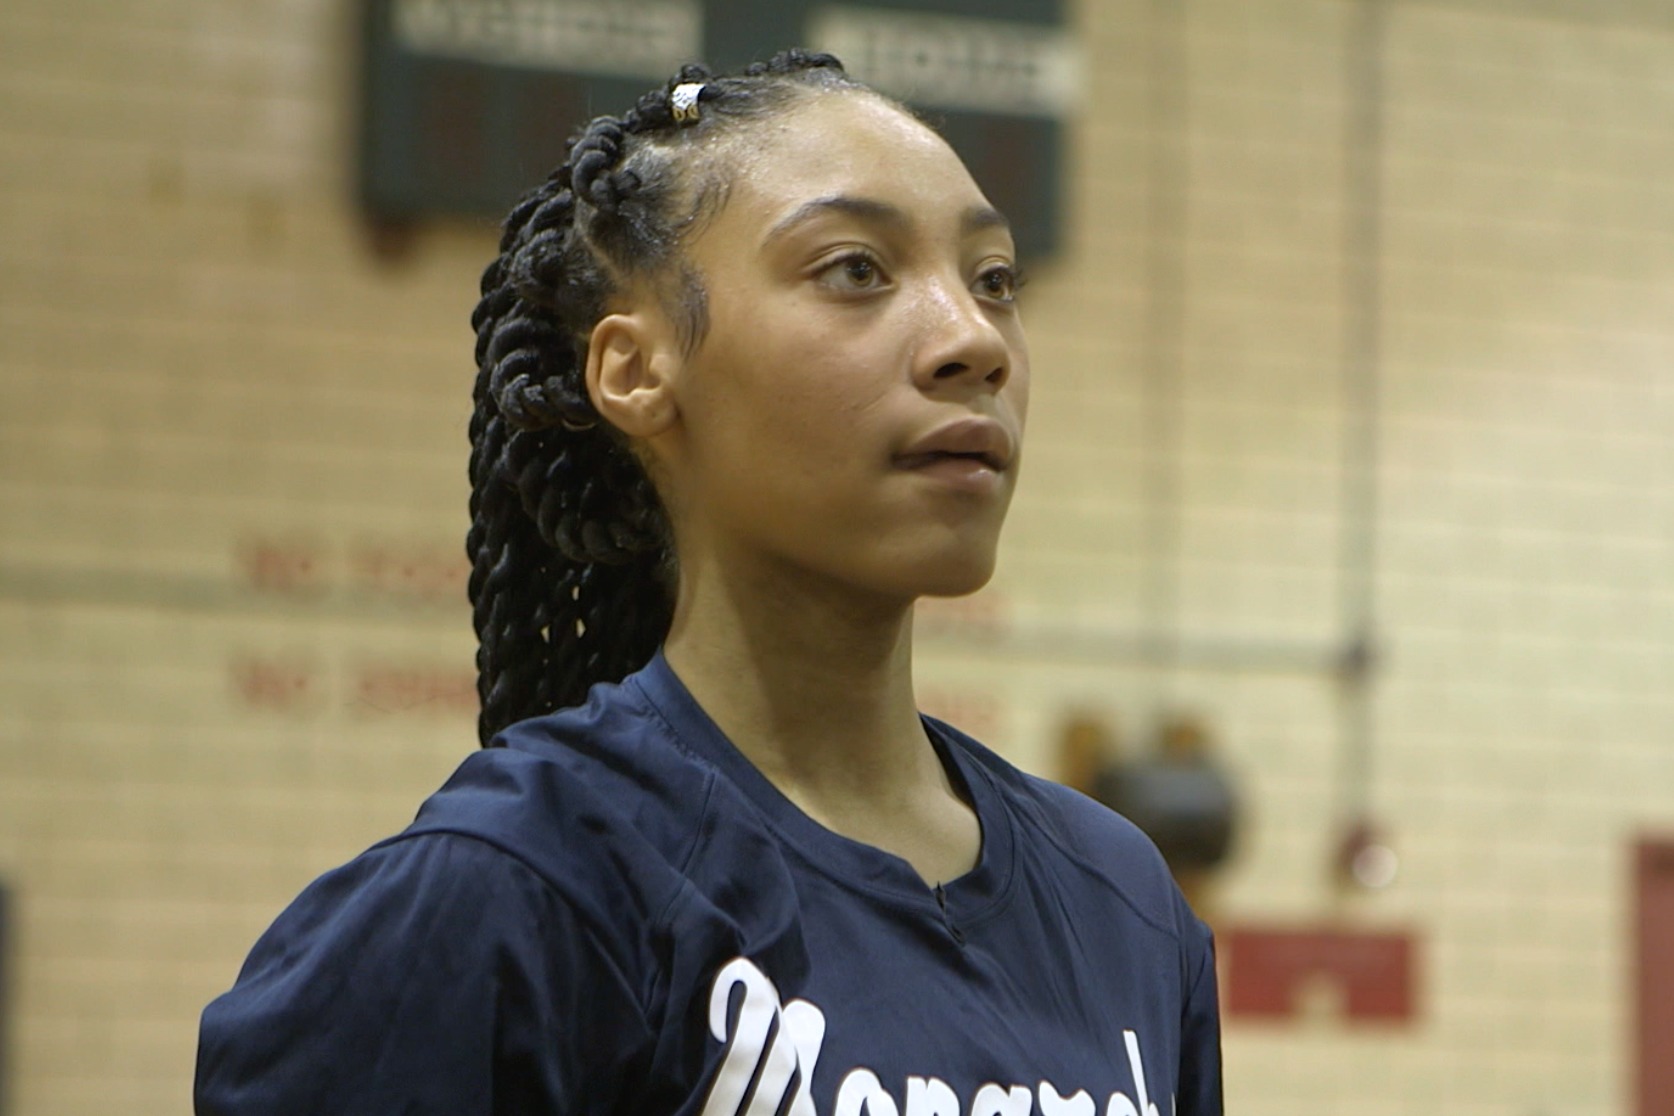 18 Facts About Mo'ne Davis That Will Make You Love Her Even More